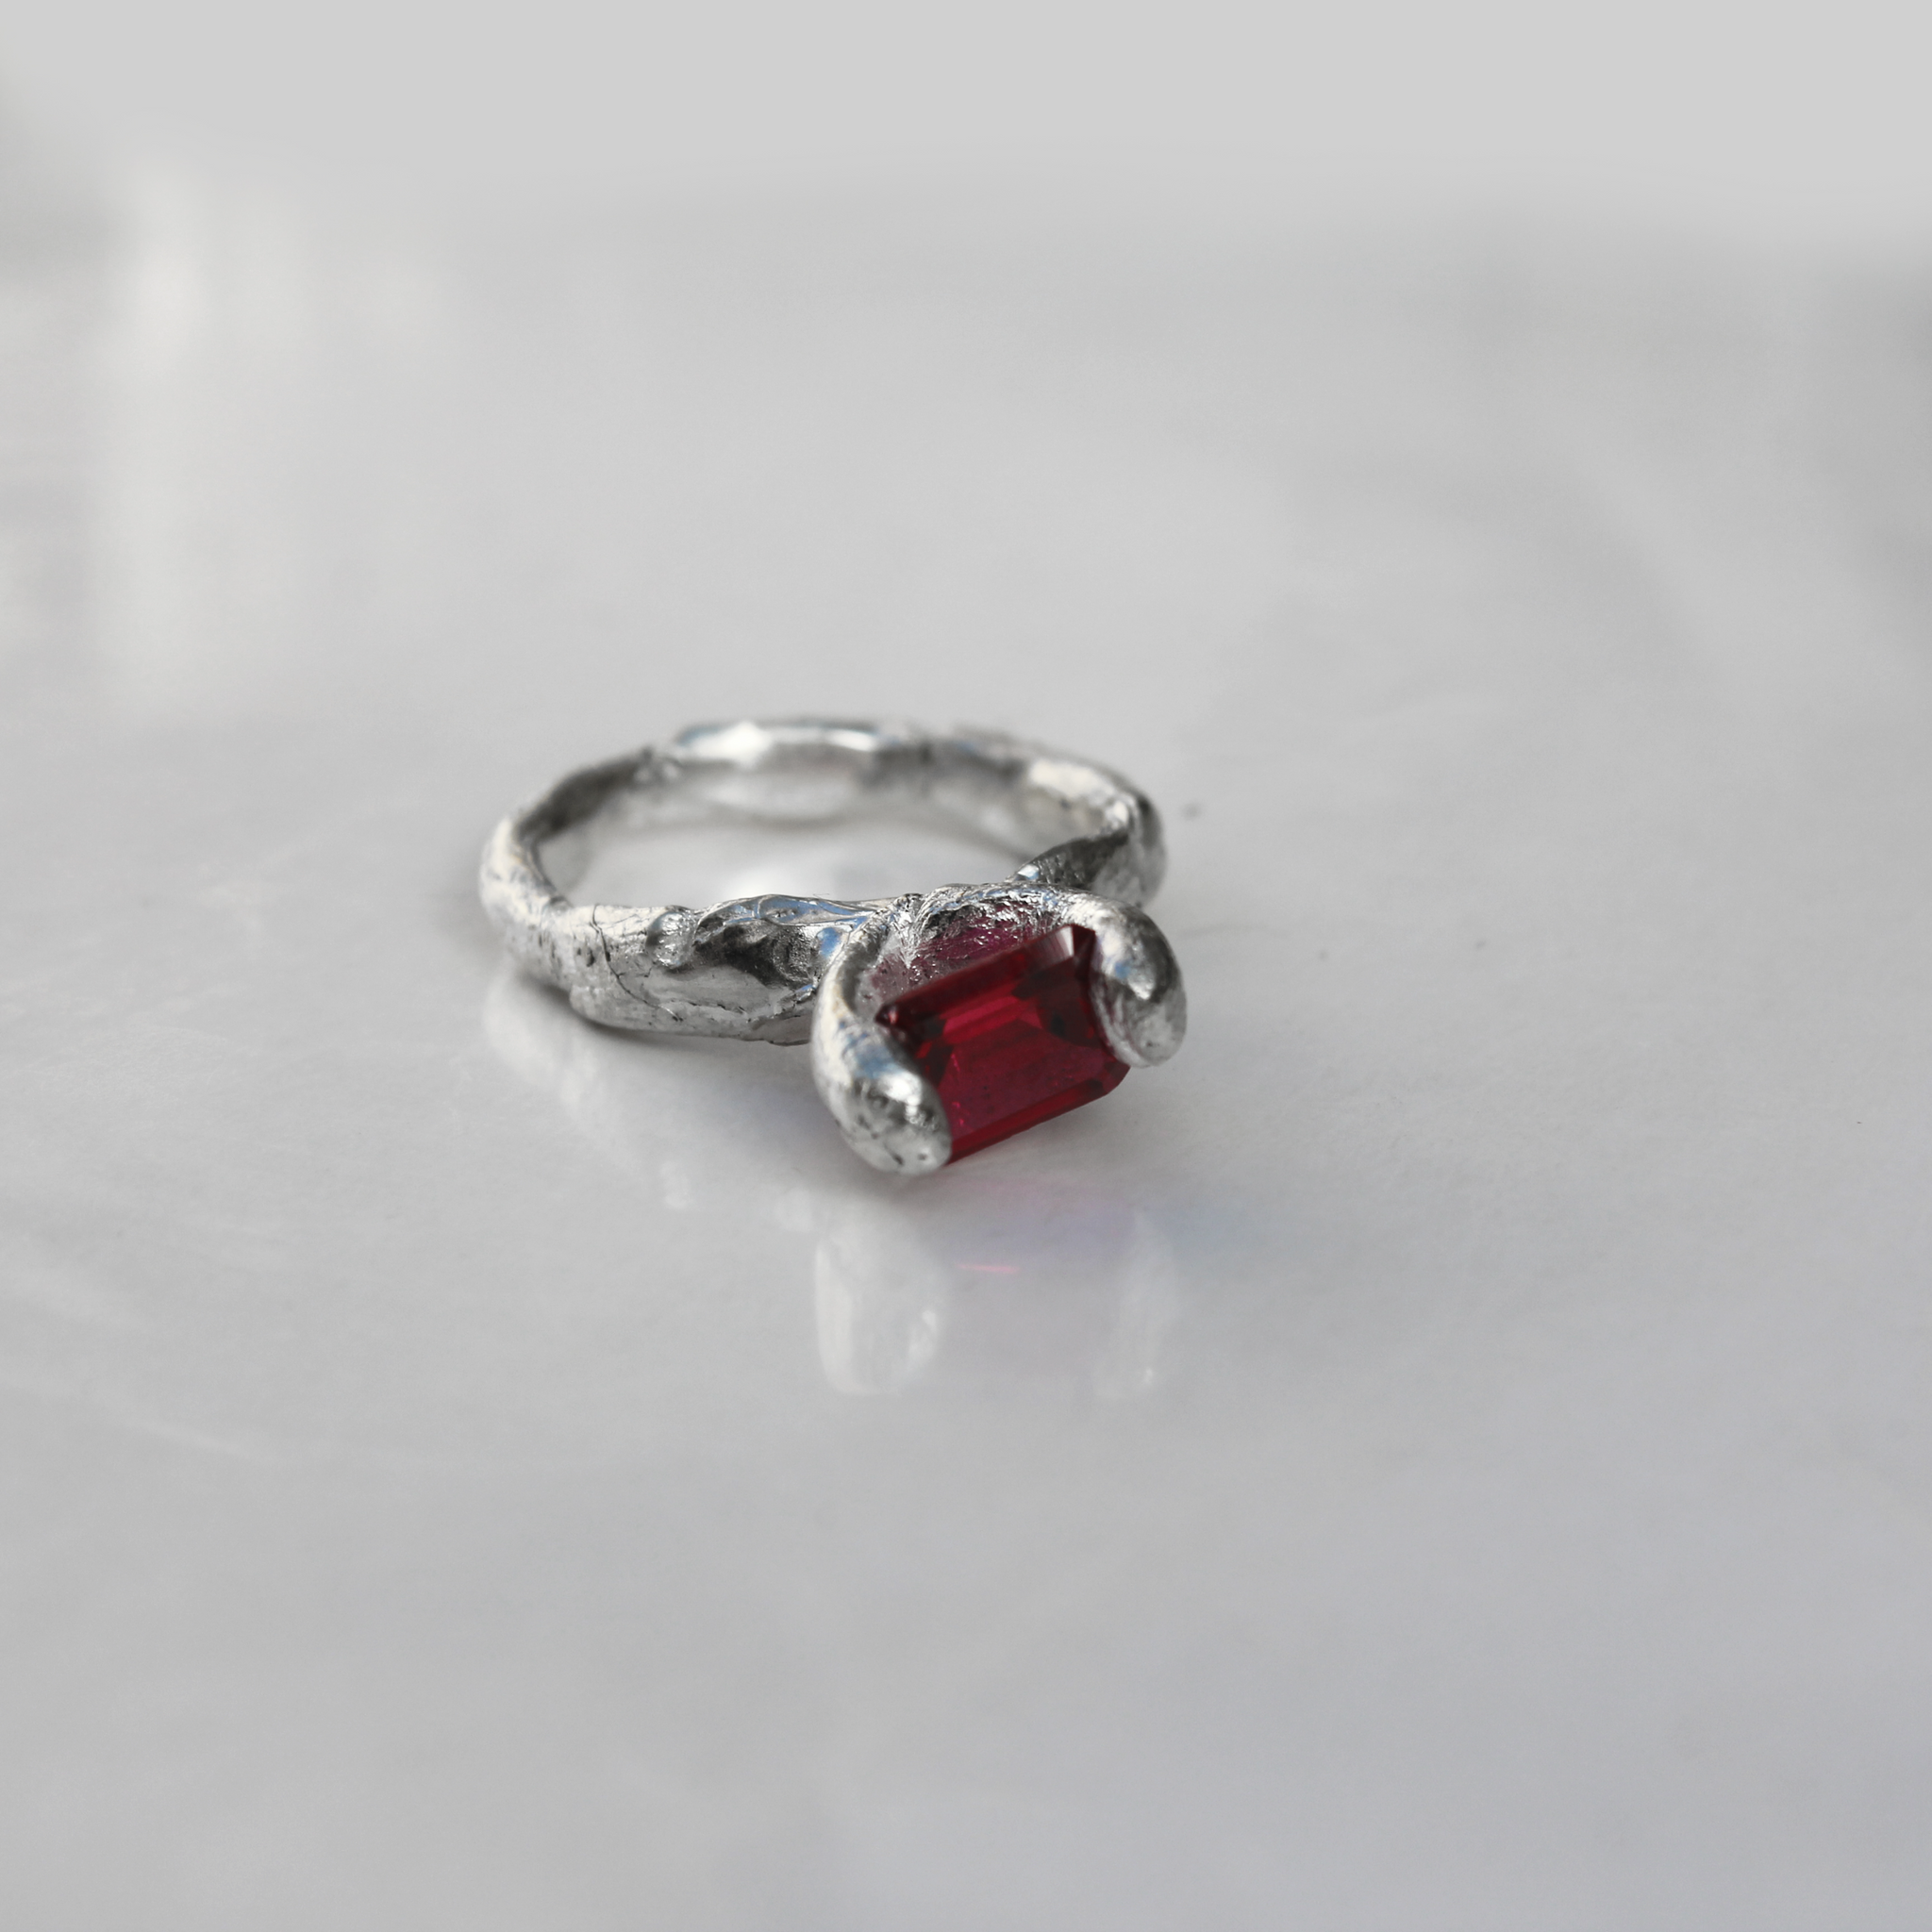 Handmade silver ring with central ruby gem. Made sustainably by emerging Melbourne jeweller called Garage bands. 